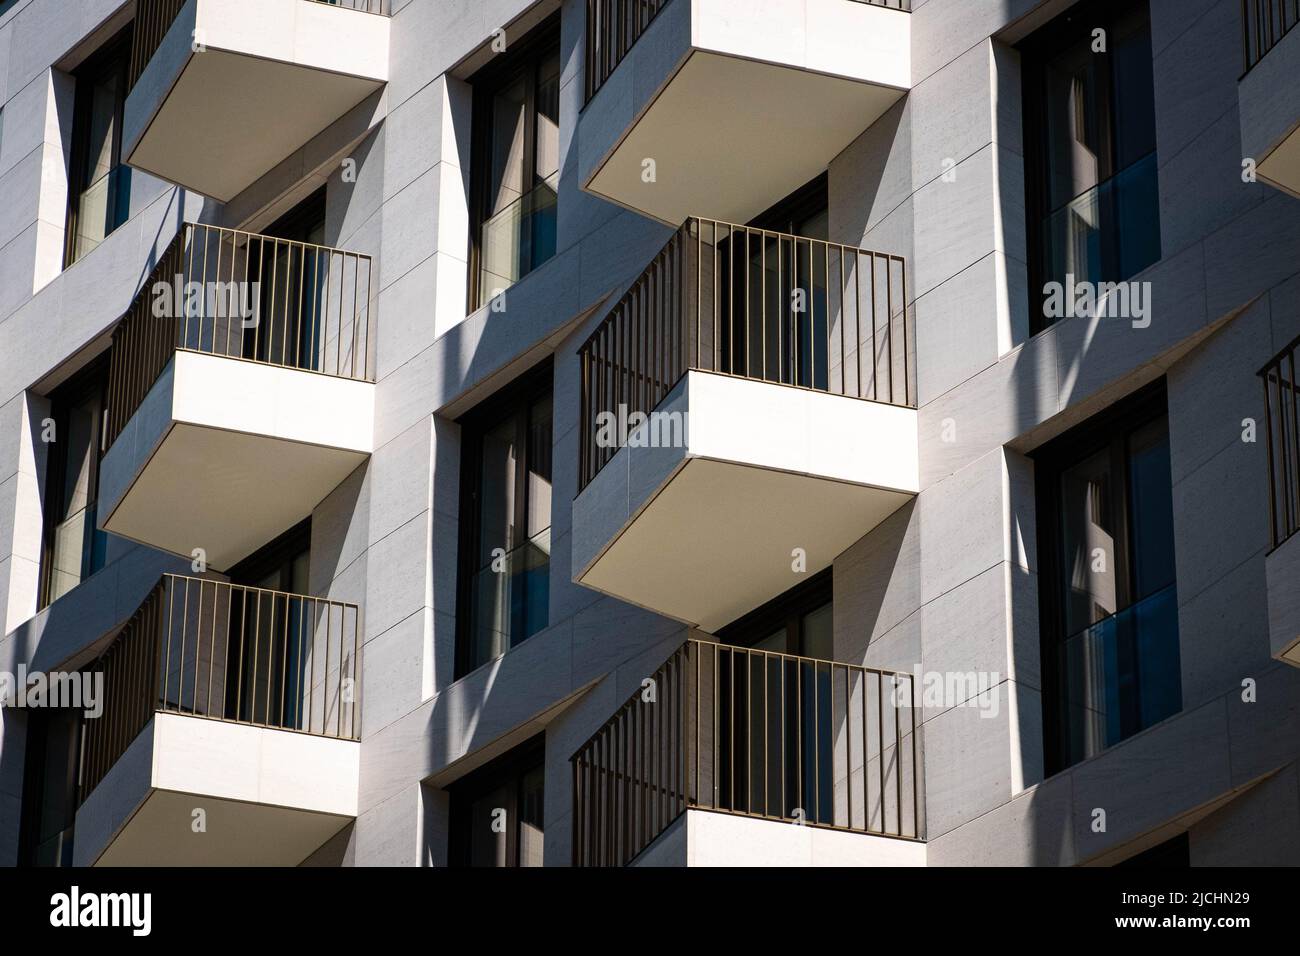 balconies on apartment building facade, residential real estate Stock Photo